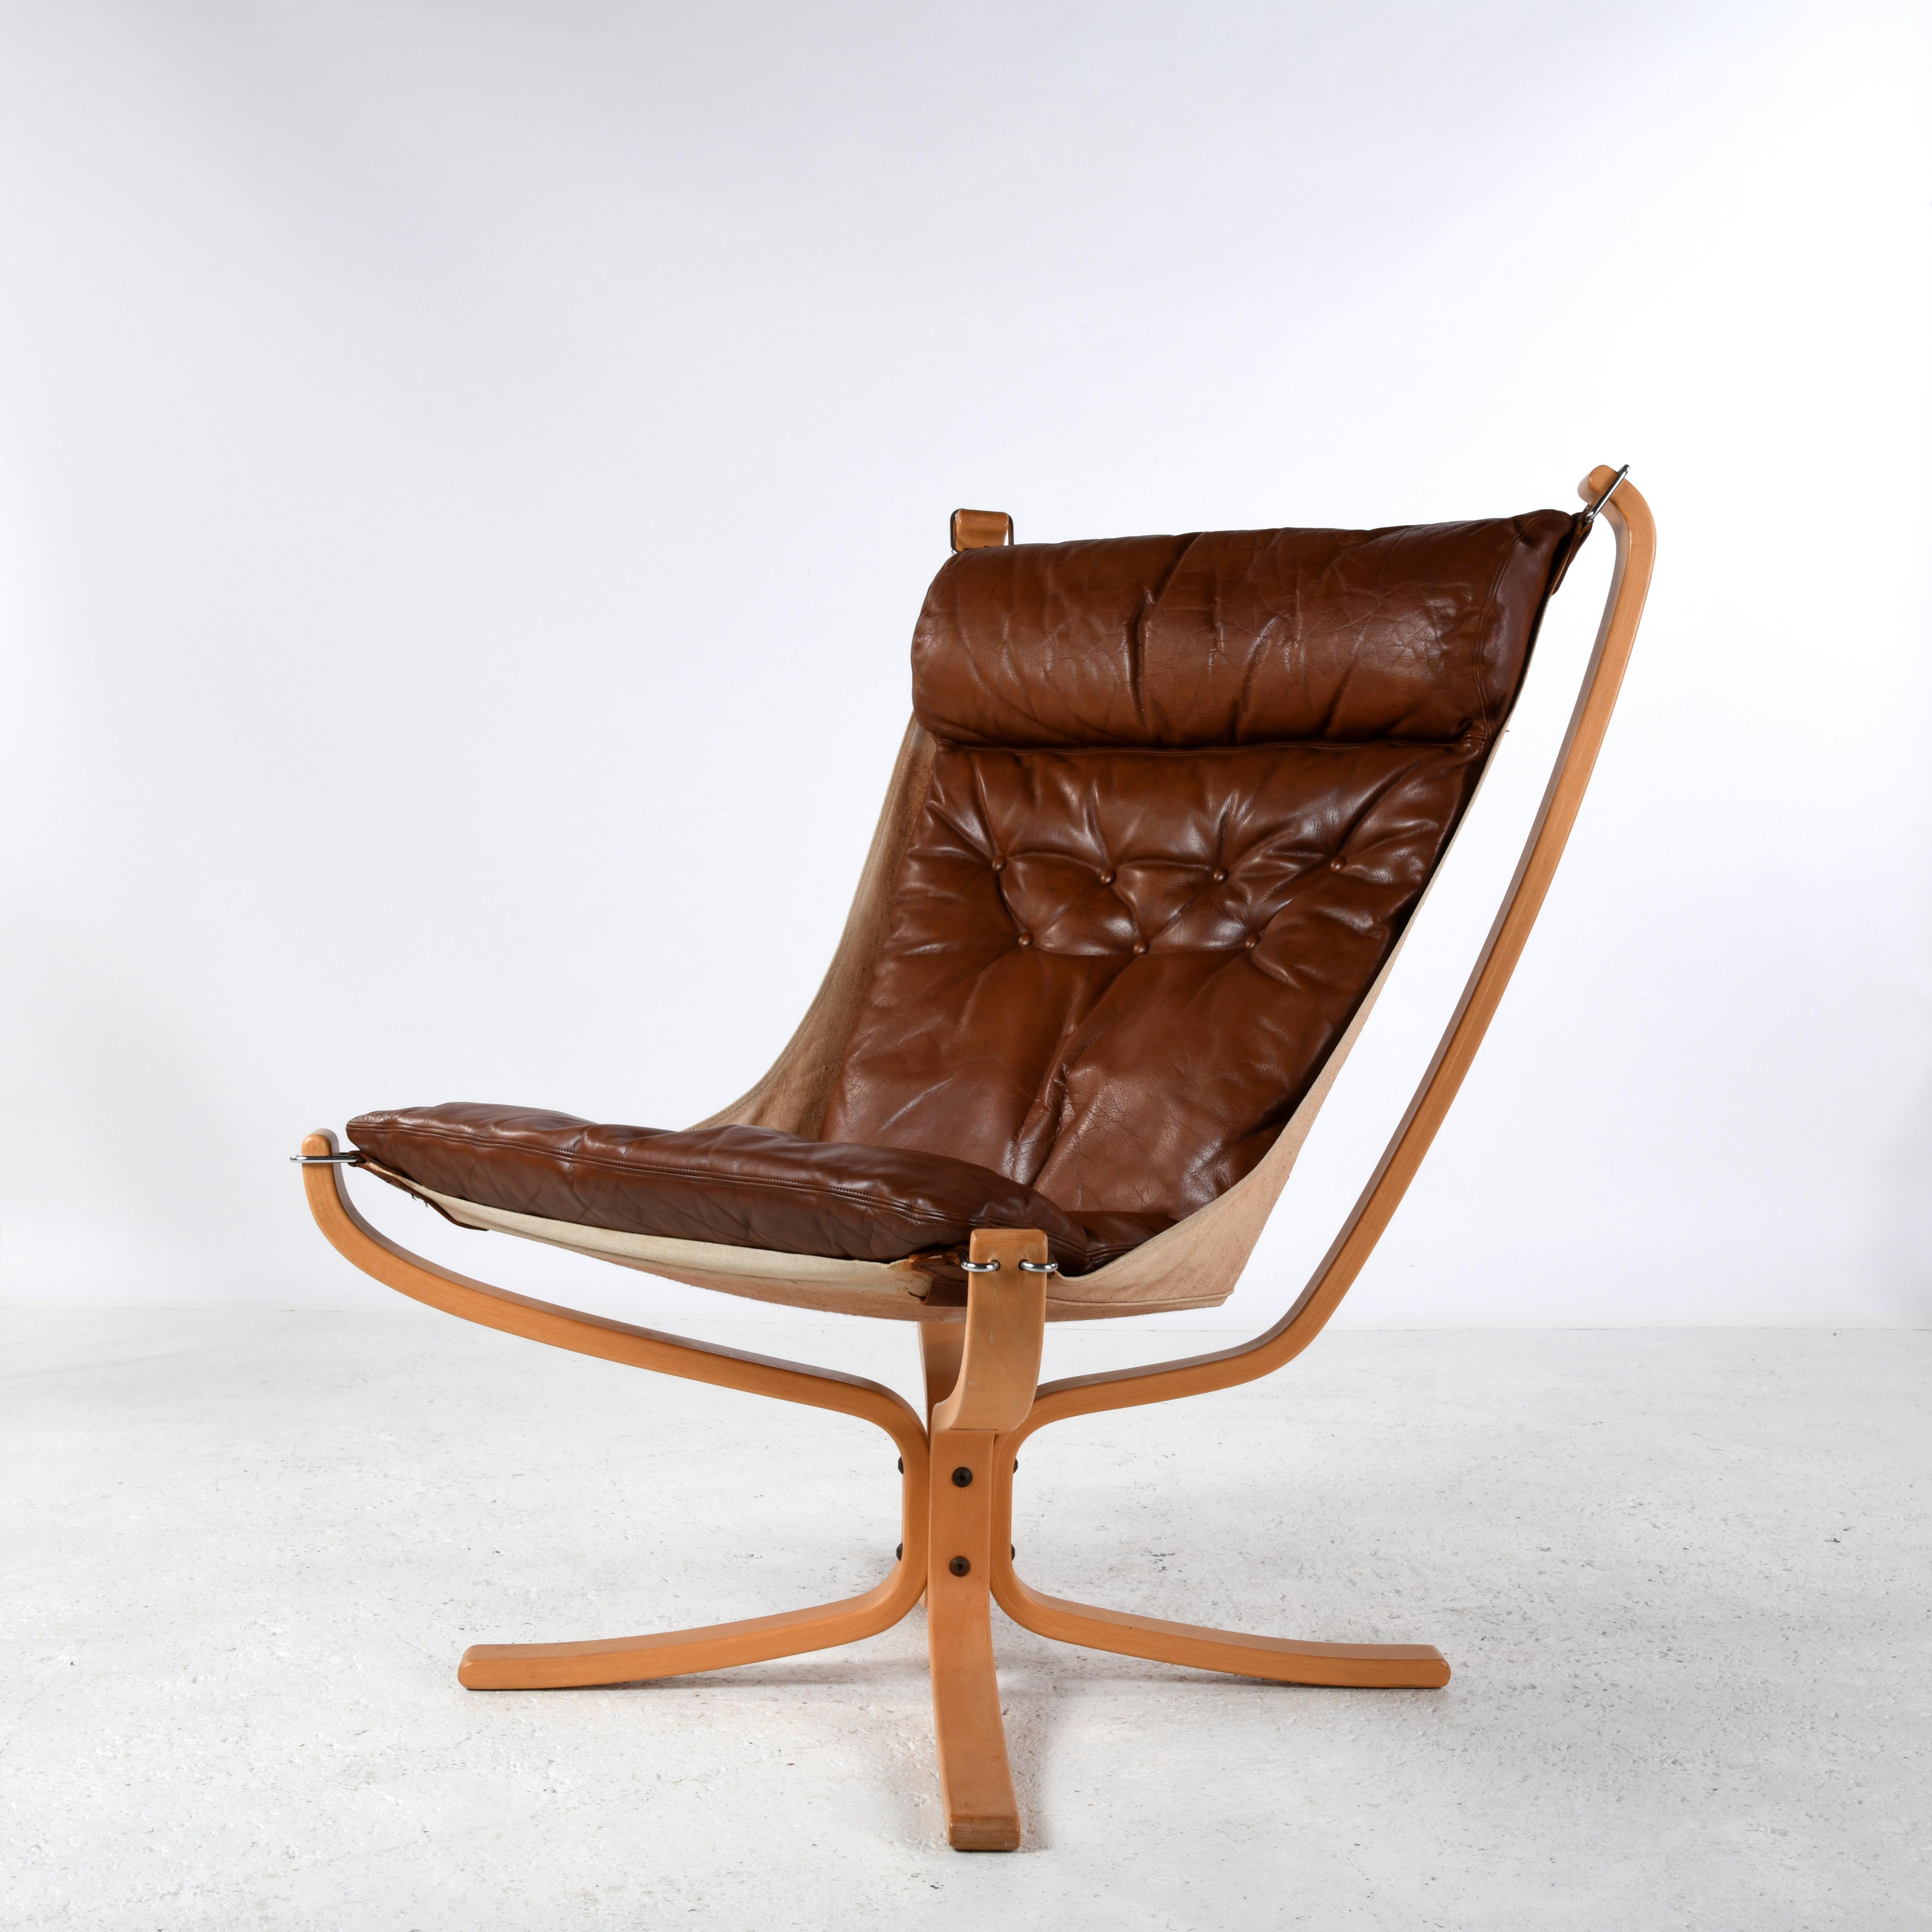 Norwegian Falcon chair, design Sigurd Ressell, wood and brown leather version